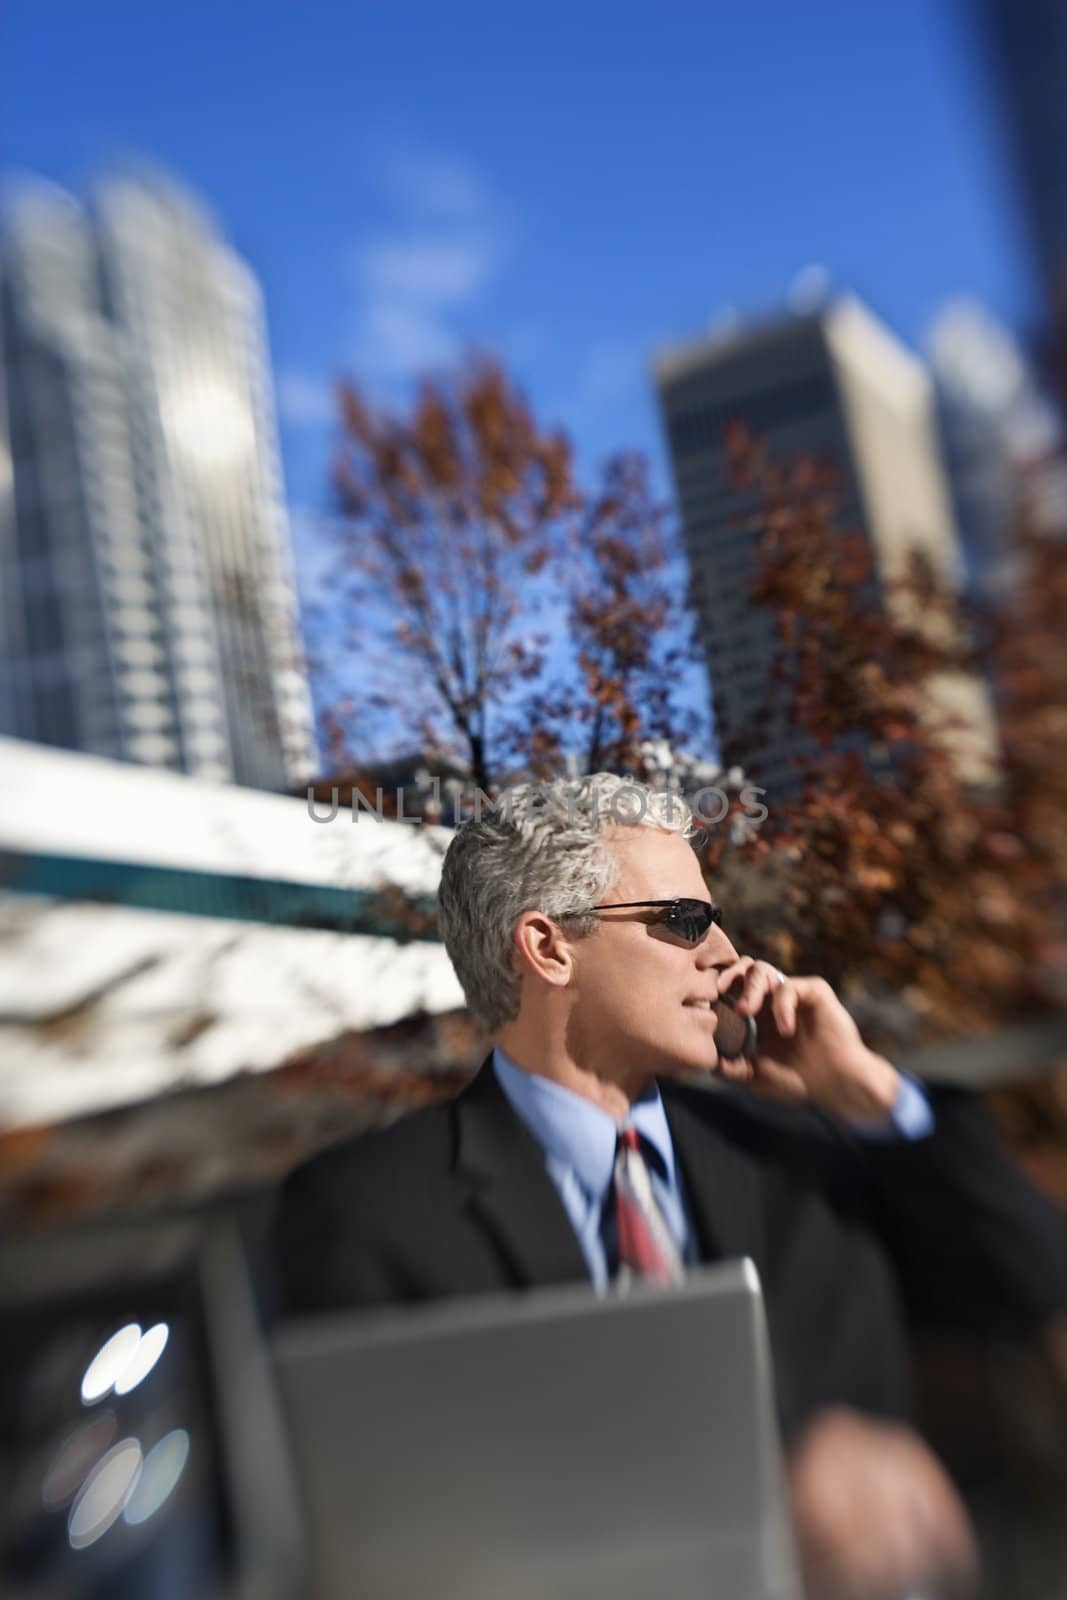 Prime adult Caucasian man in suit sitting at patio table outside with laptop talking on cellphone wearing sunglasses with buildings in background.